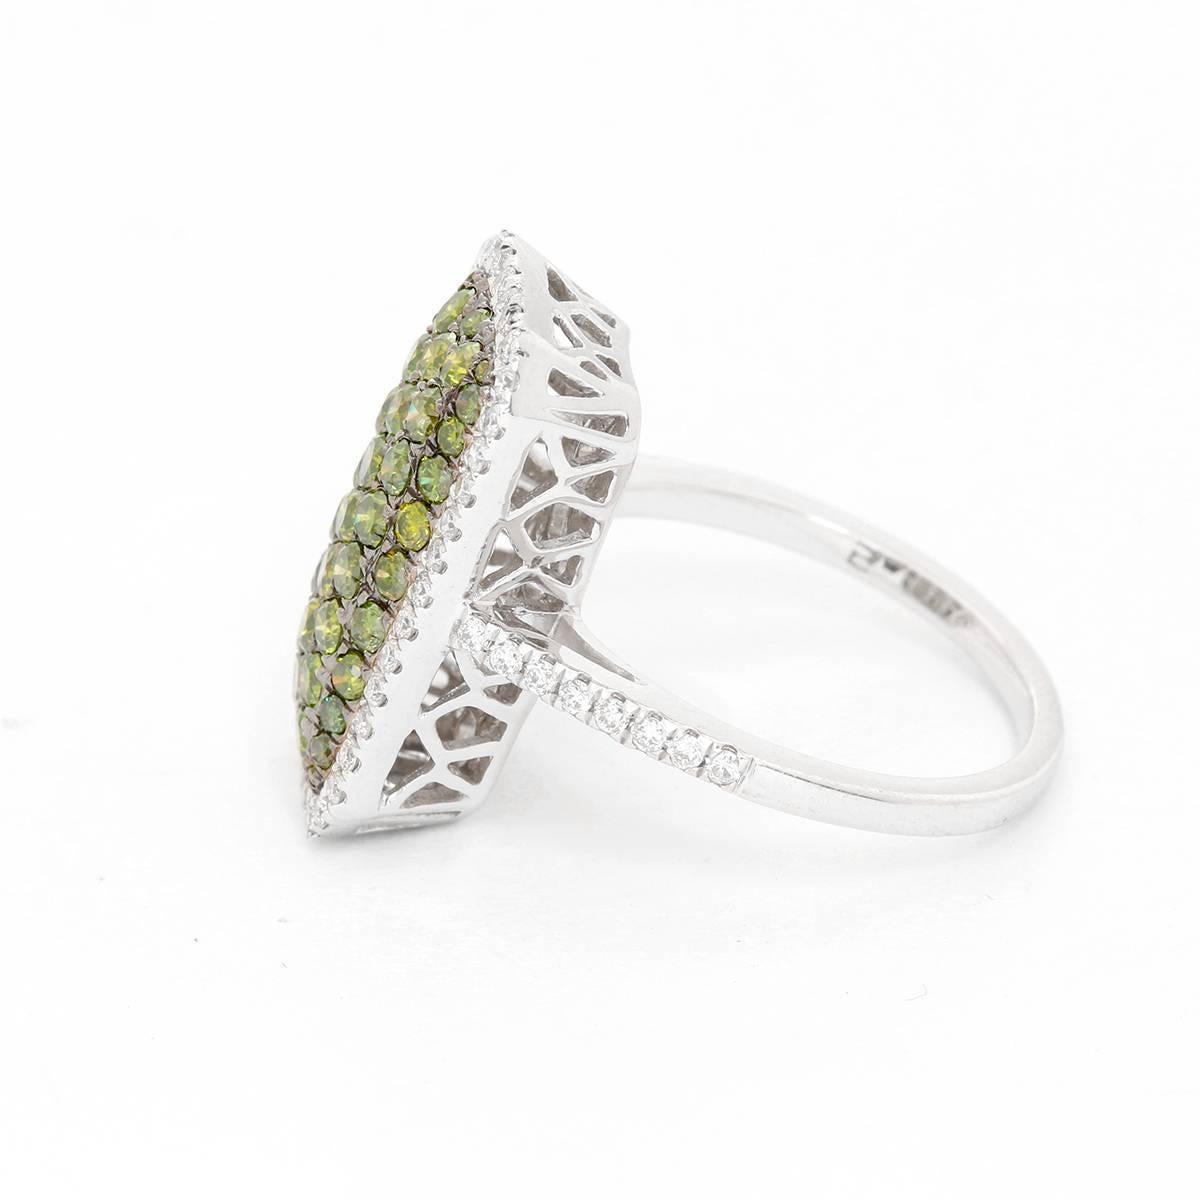 Green Pave Diamond Ring with White Diamond Halo Size - . Emerald shaped Pave green Diamonds. 1.2 cts treated green diamonds set in 14K White gold ring with rhodium accents. Surrounded  by .43 cts of white diamonds.